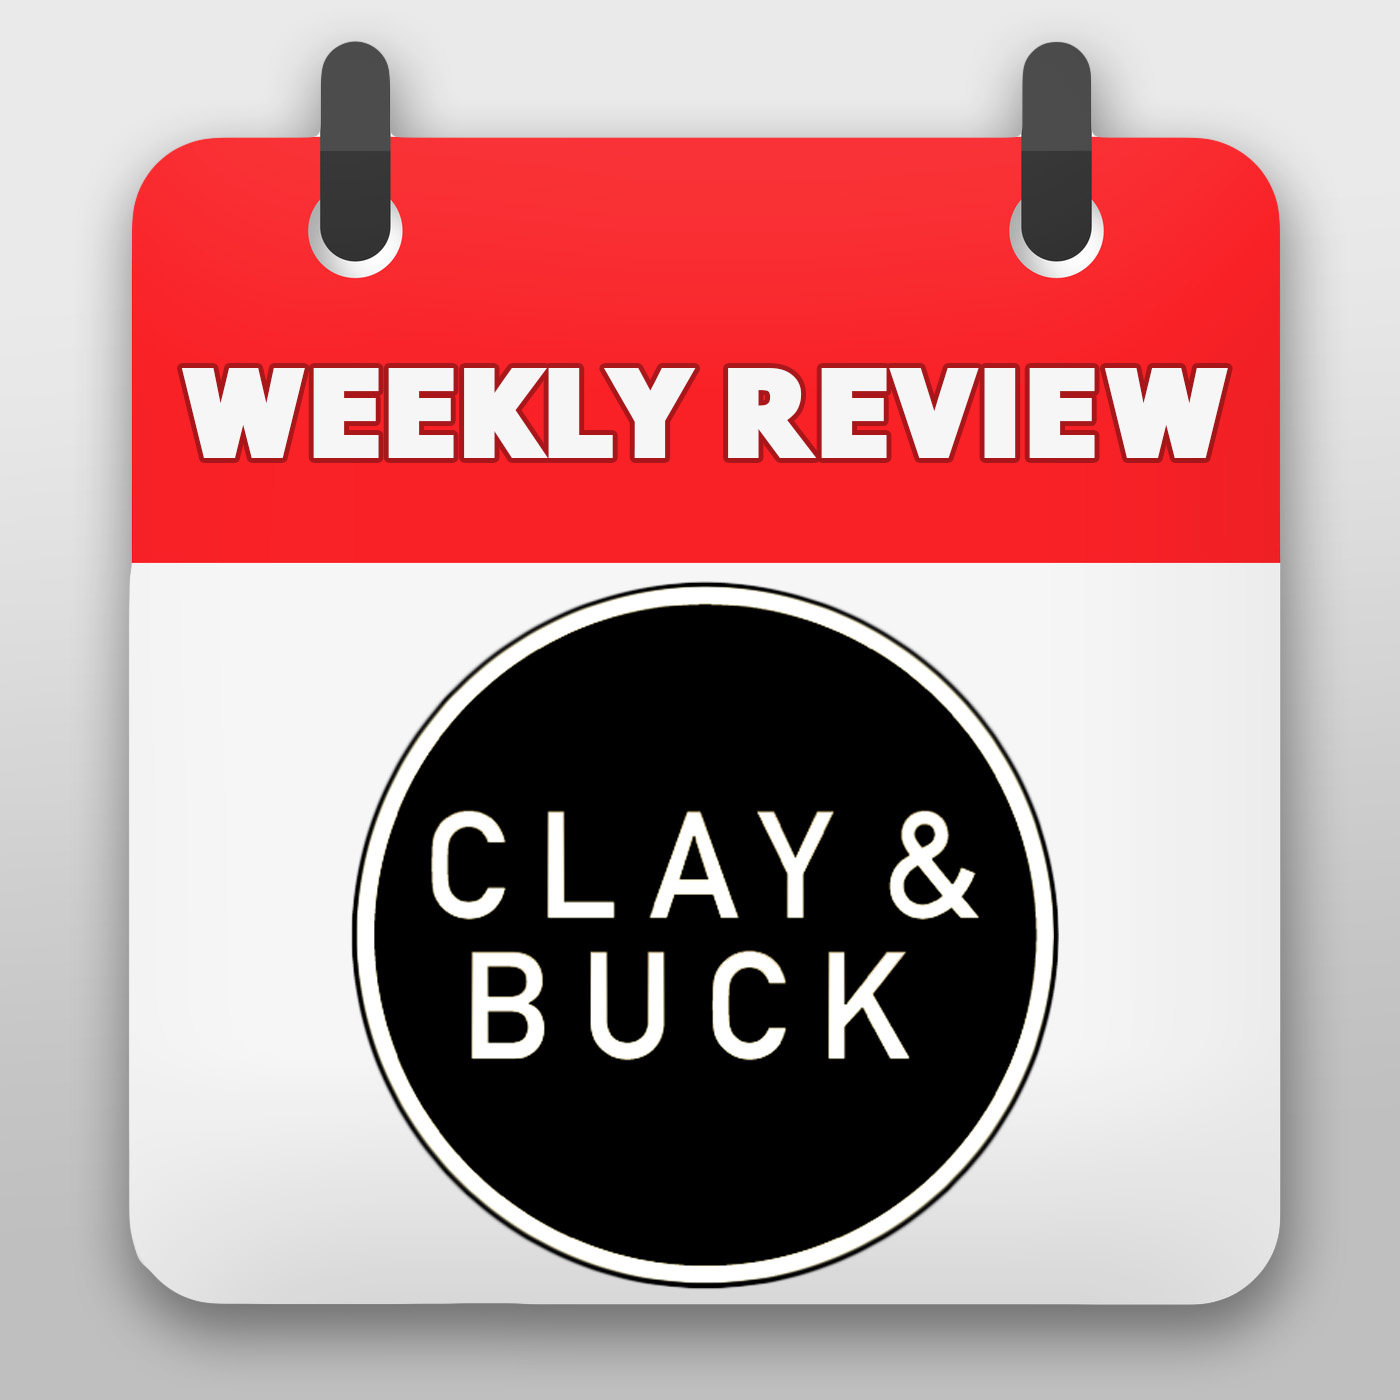 Weekly Review With Clay and Buck H2 - Appalling Leftists Won't Condemn Hamas